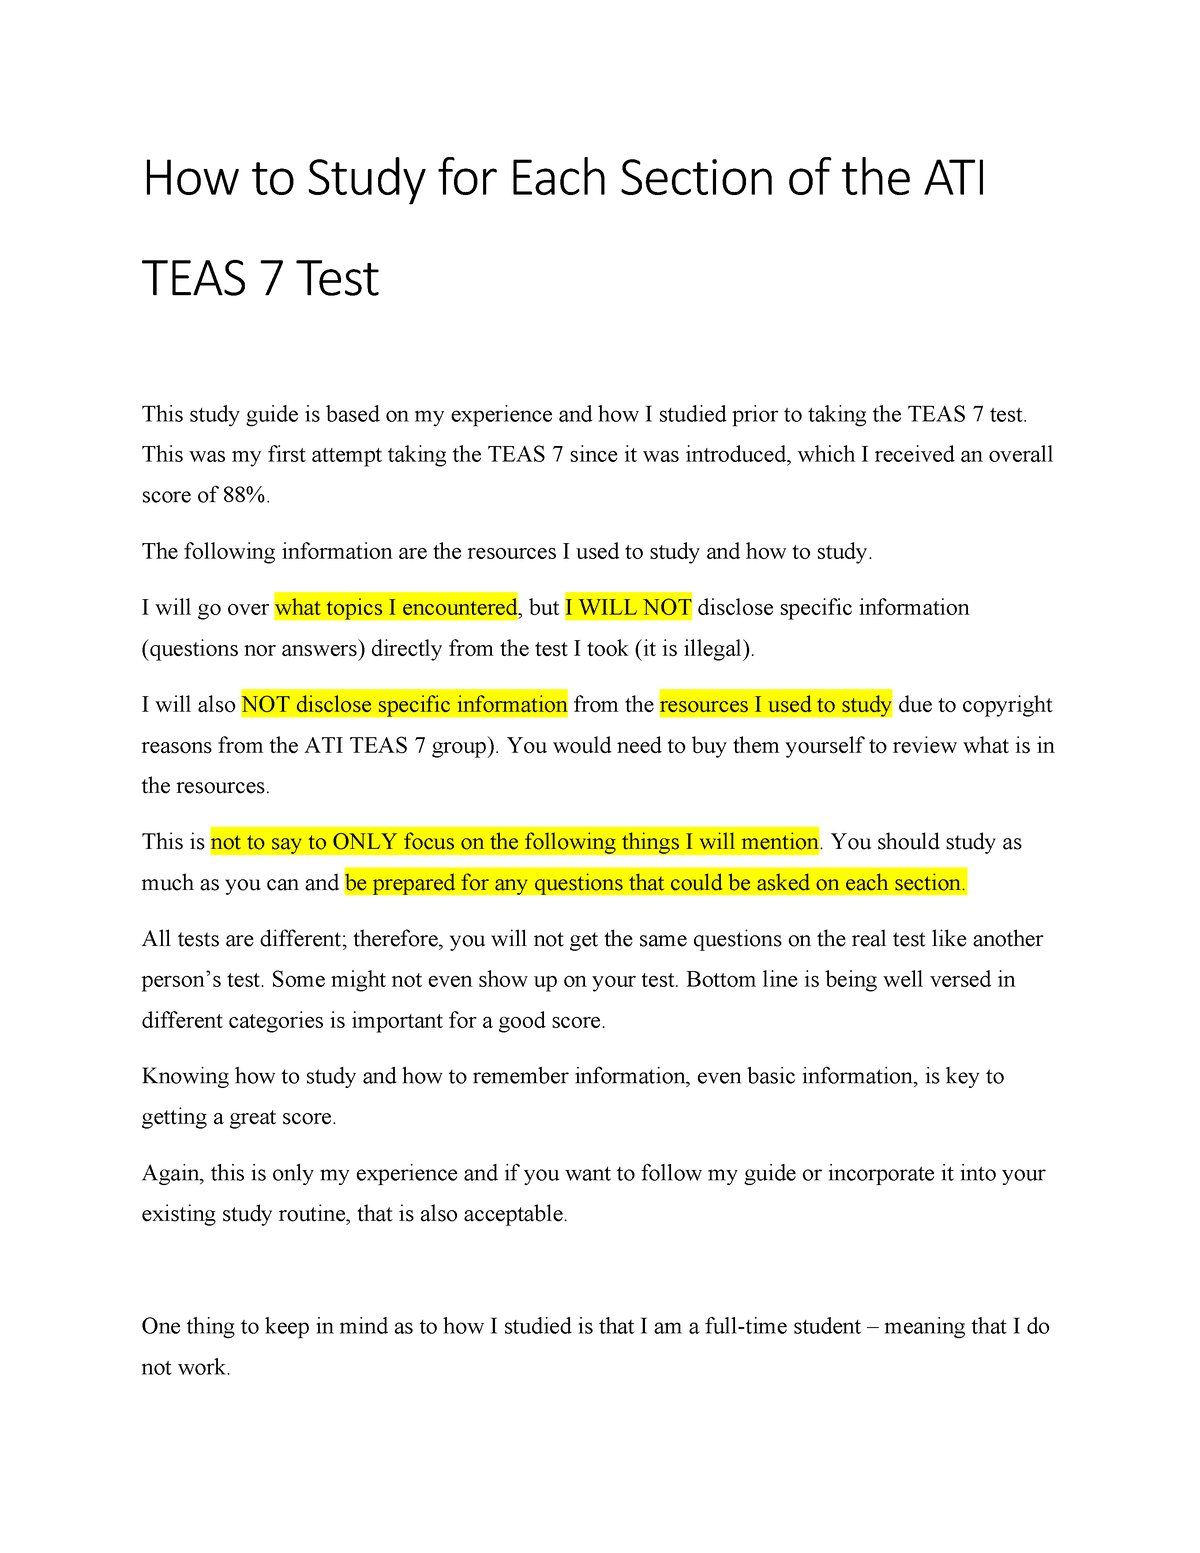 how-to-study-for-each-section-of-the-ati-teas-7-test-by-ruby-herrera